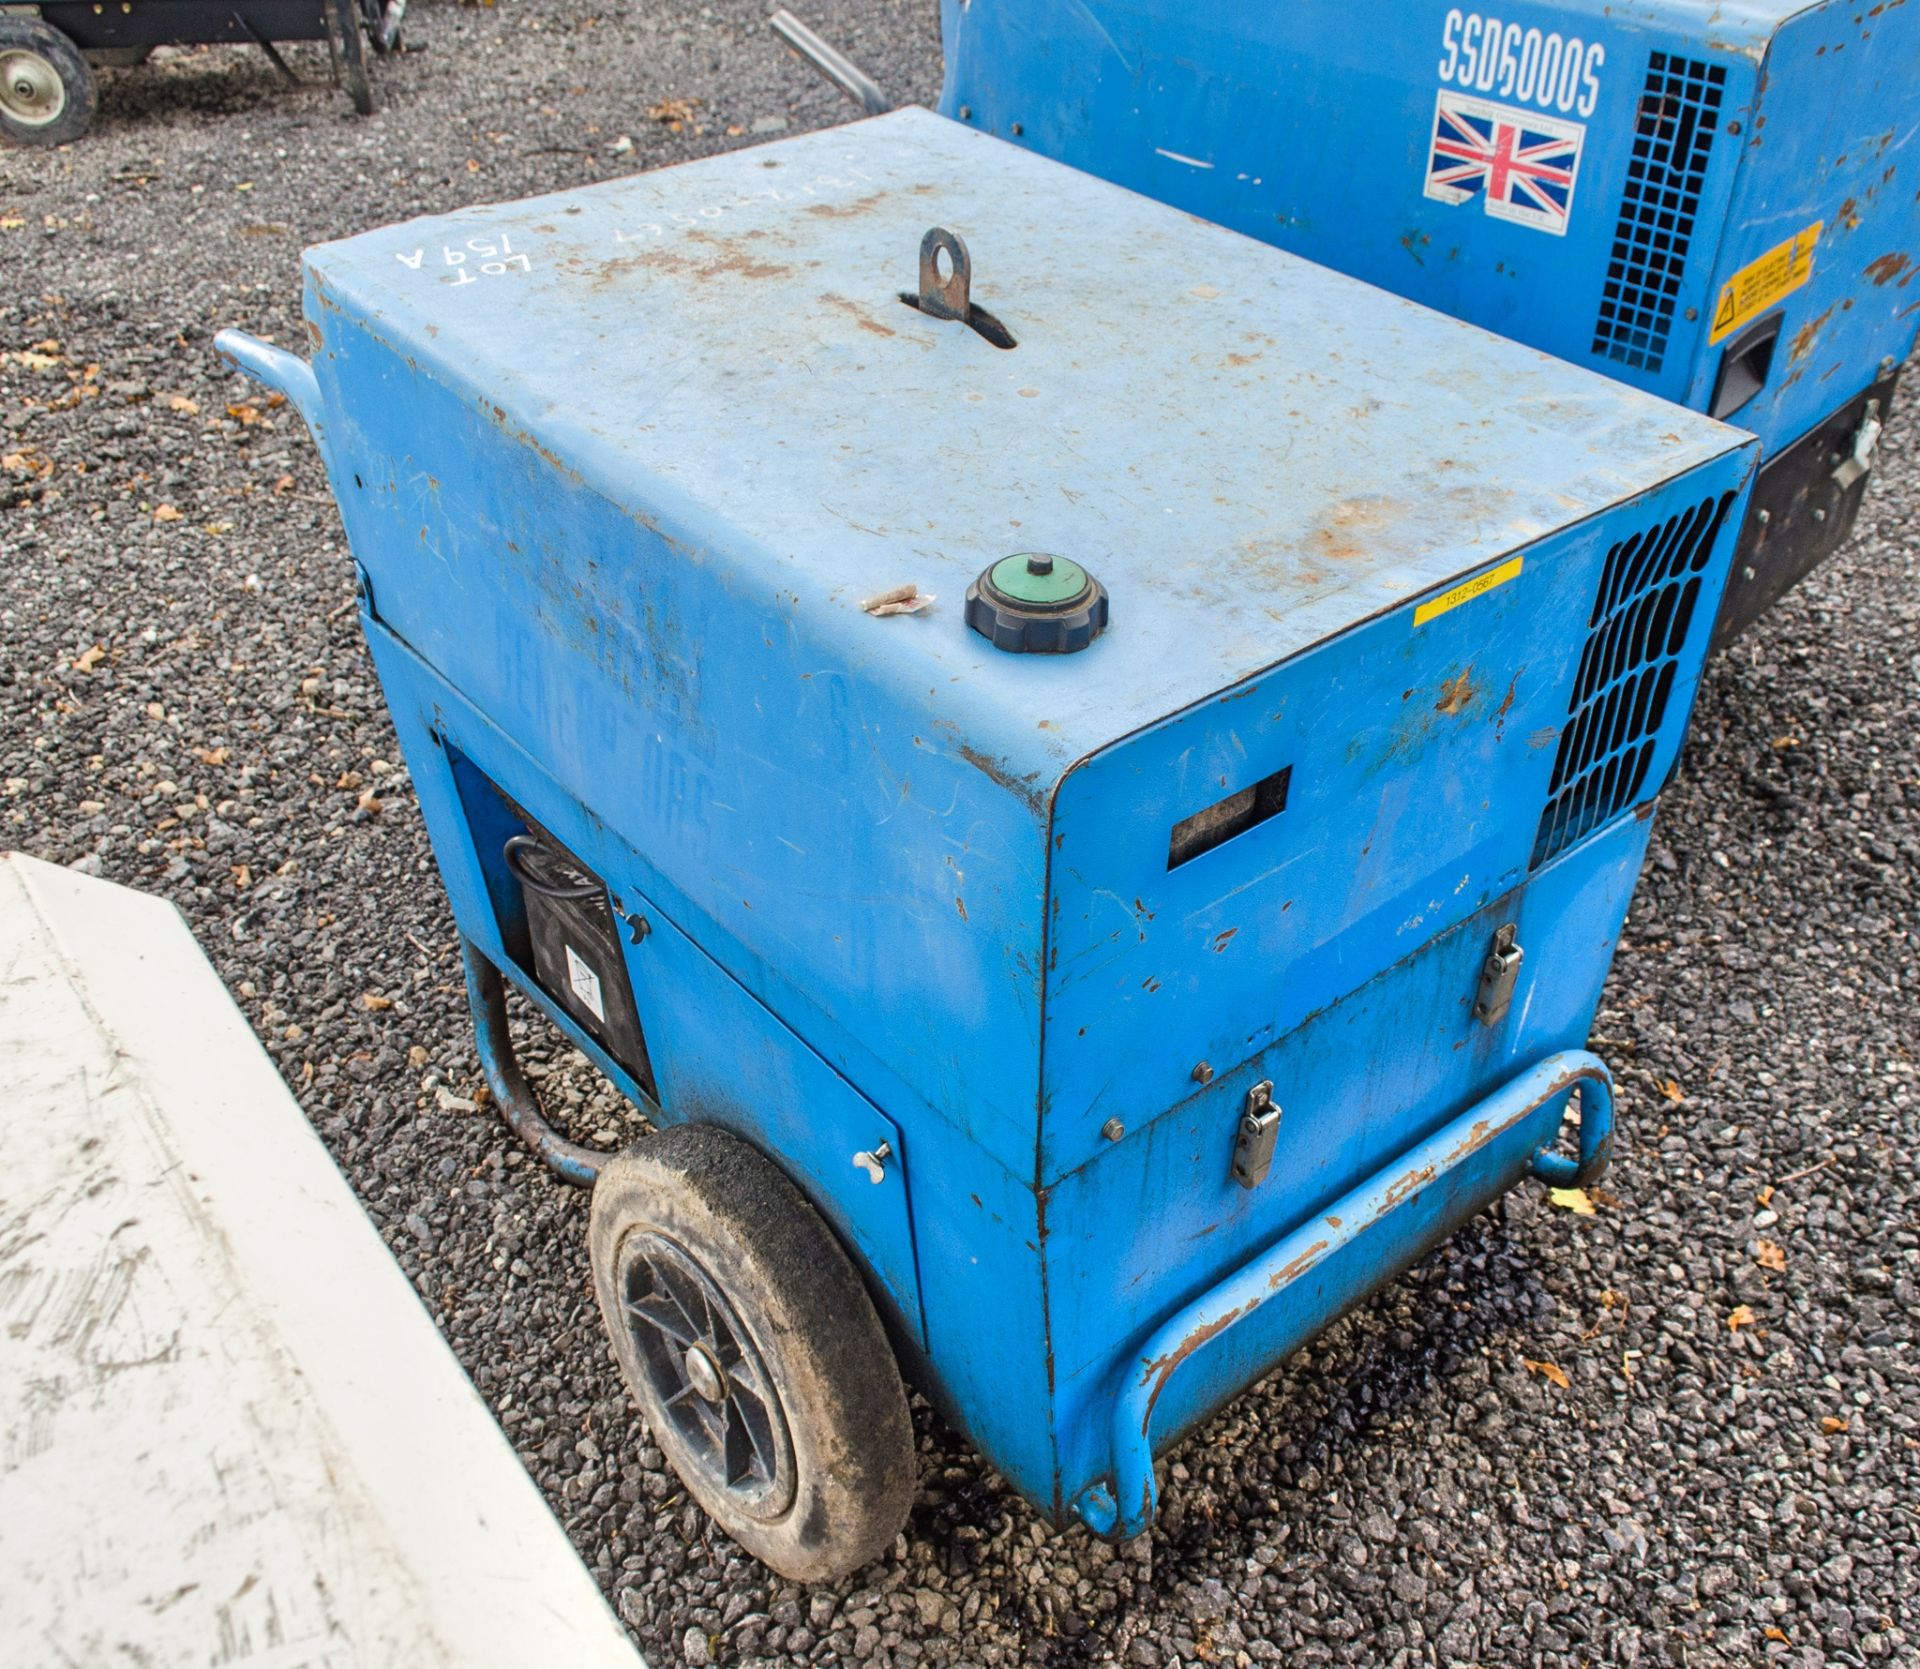 Stephill SF6000D 6 kva diesel driven generator Recorded Hours: 3330 13120567 - Image 2 of 4